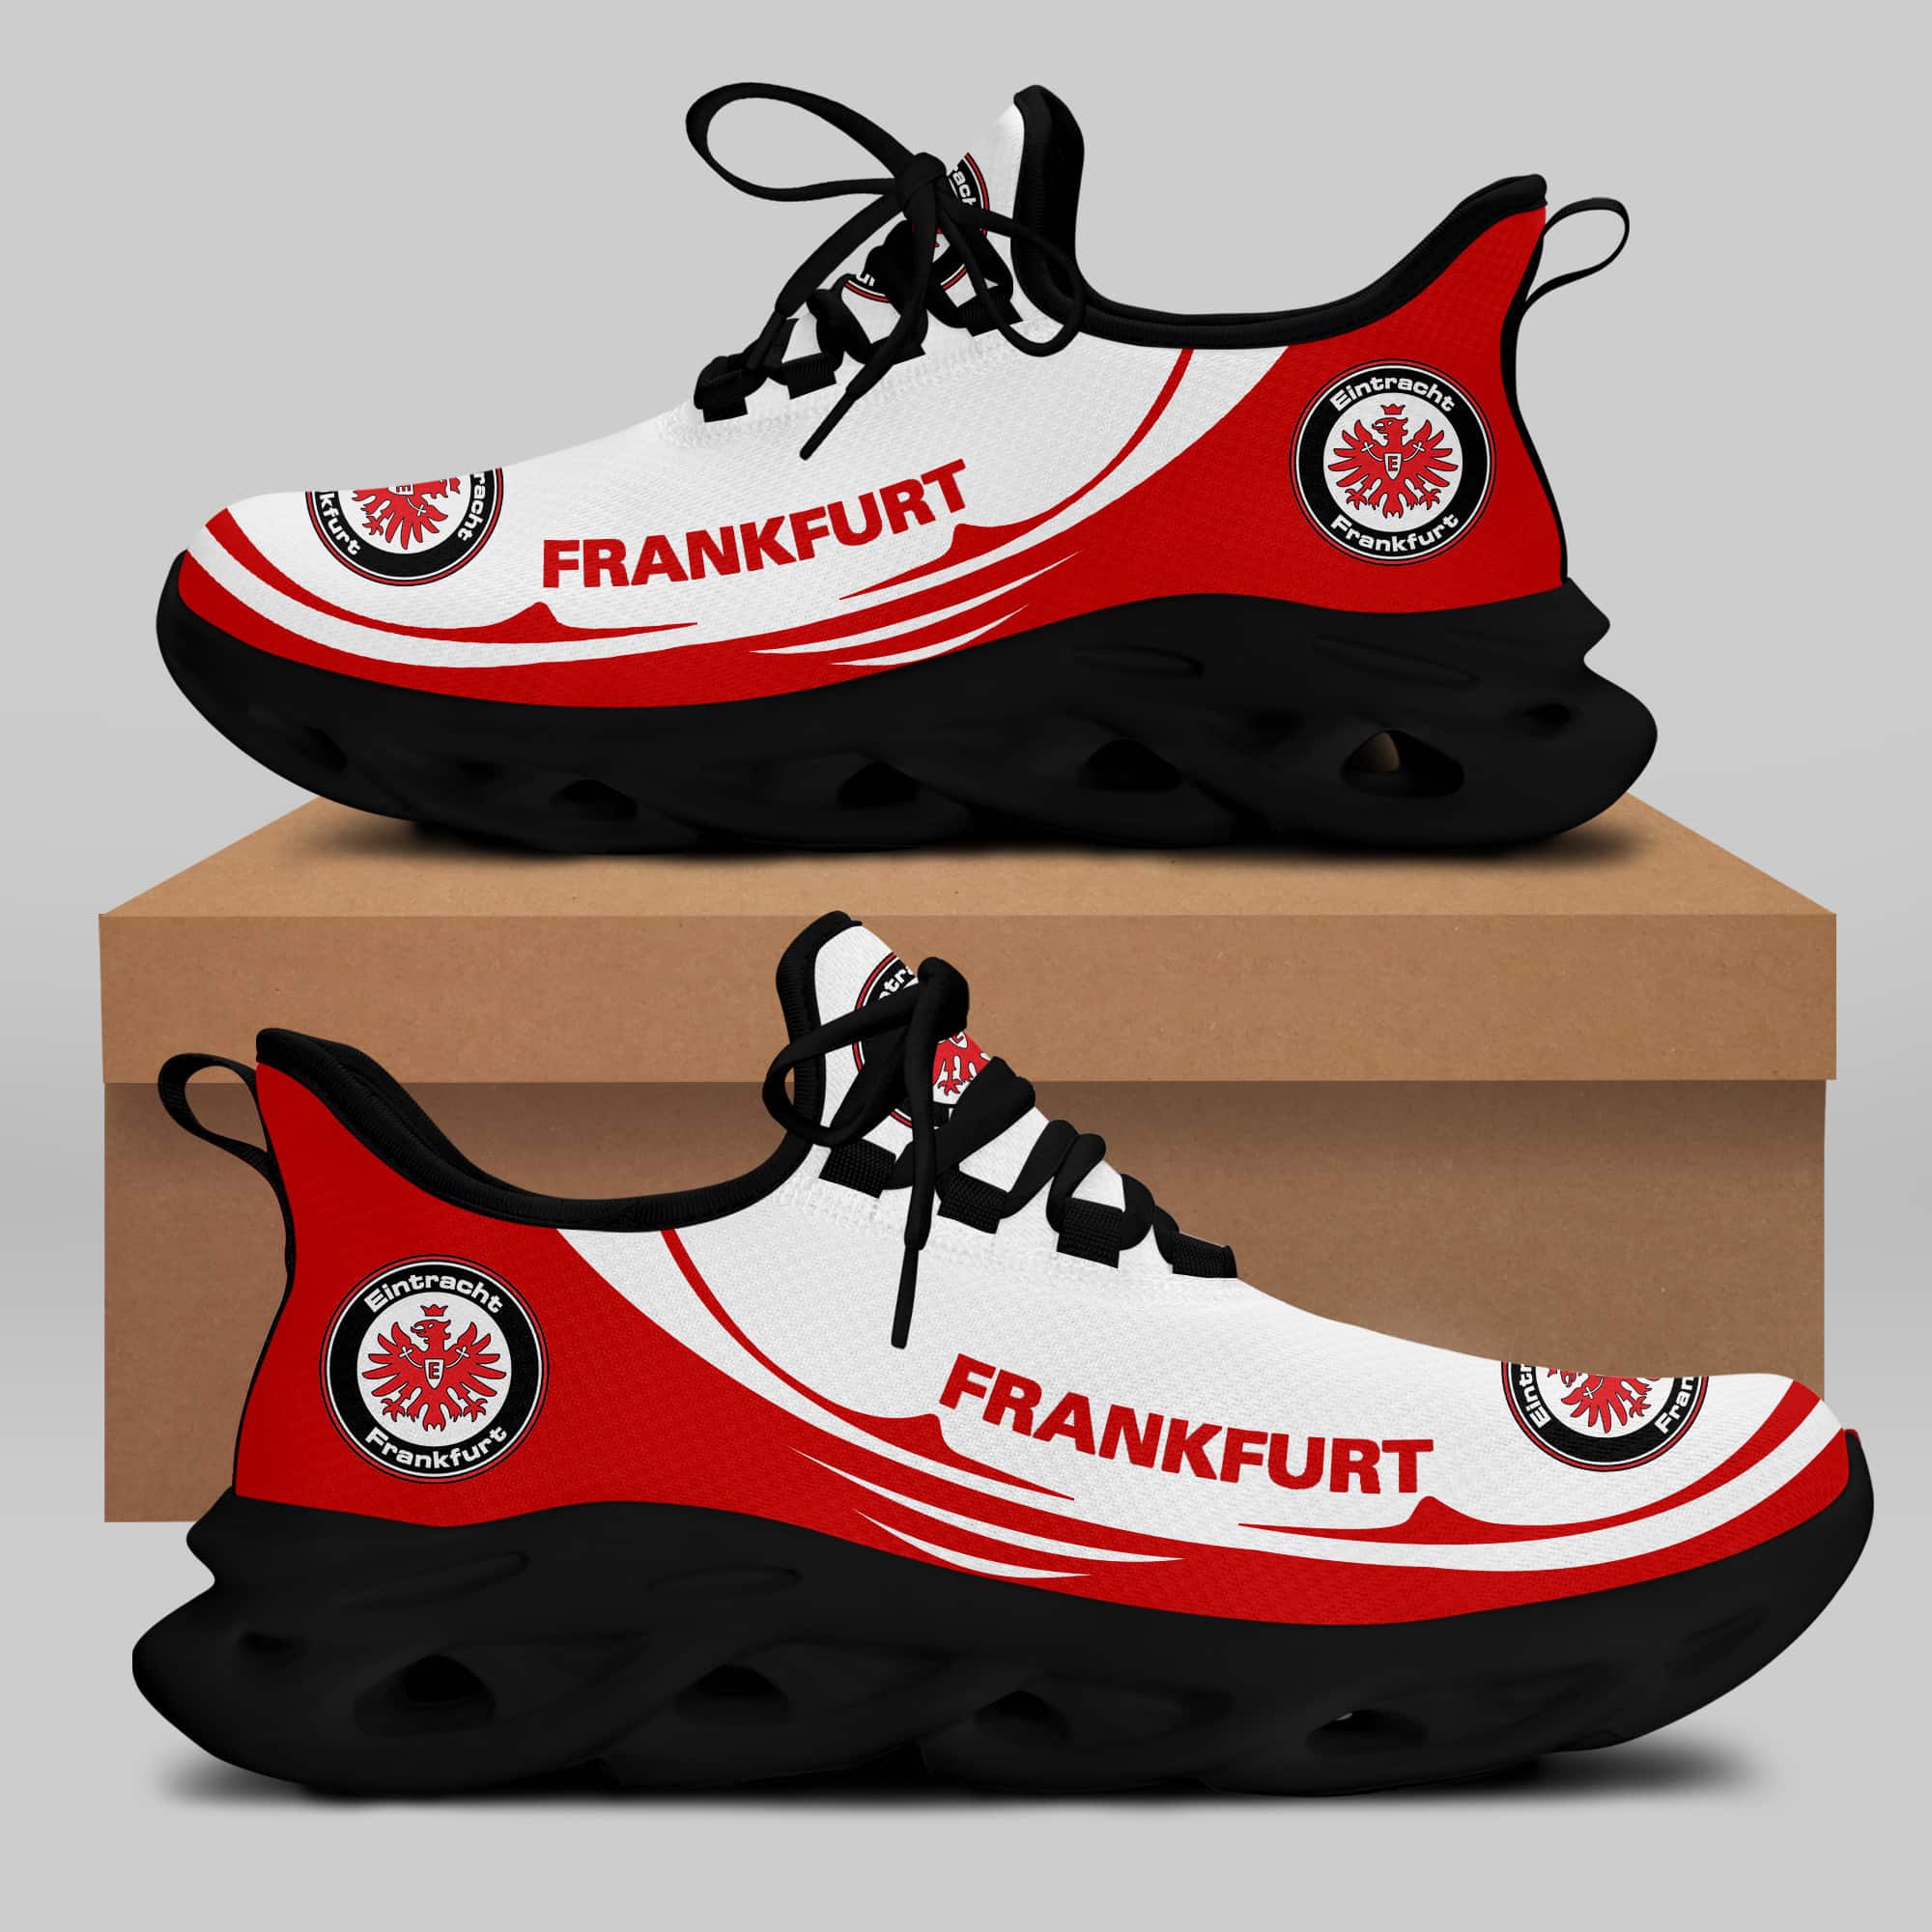 Eintracht Frankfurt Running Shoes Max Soul Shoes Sneakers Ver 19 2